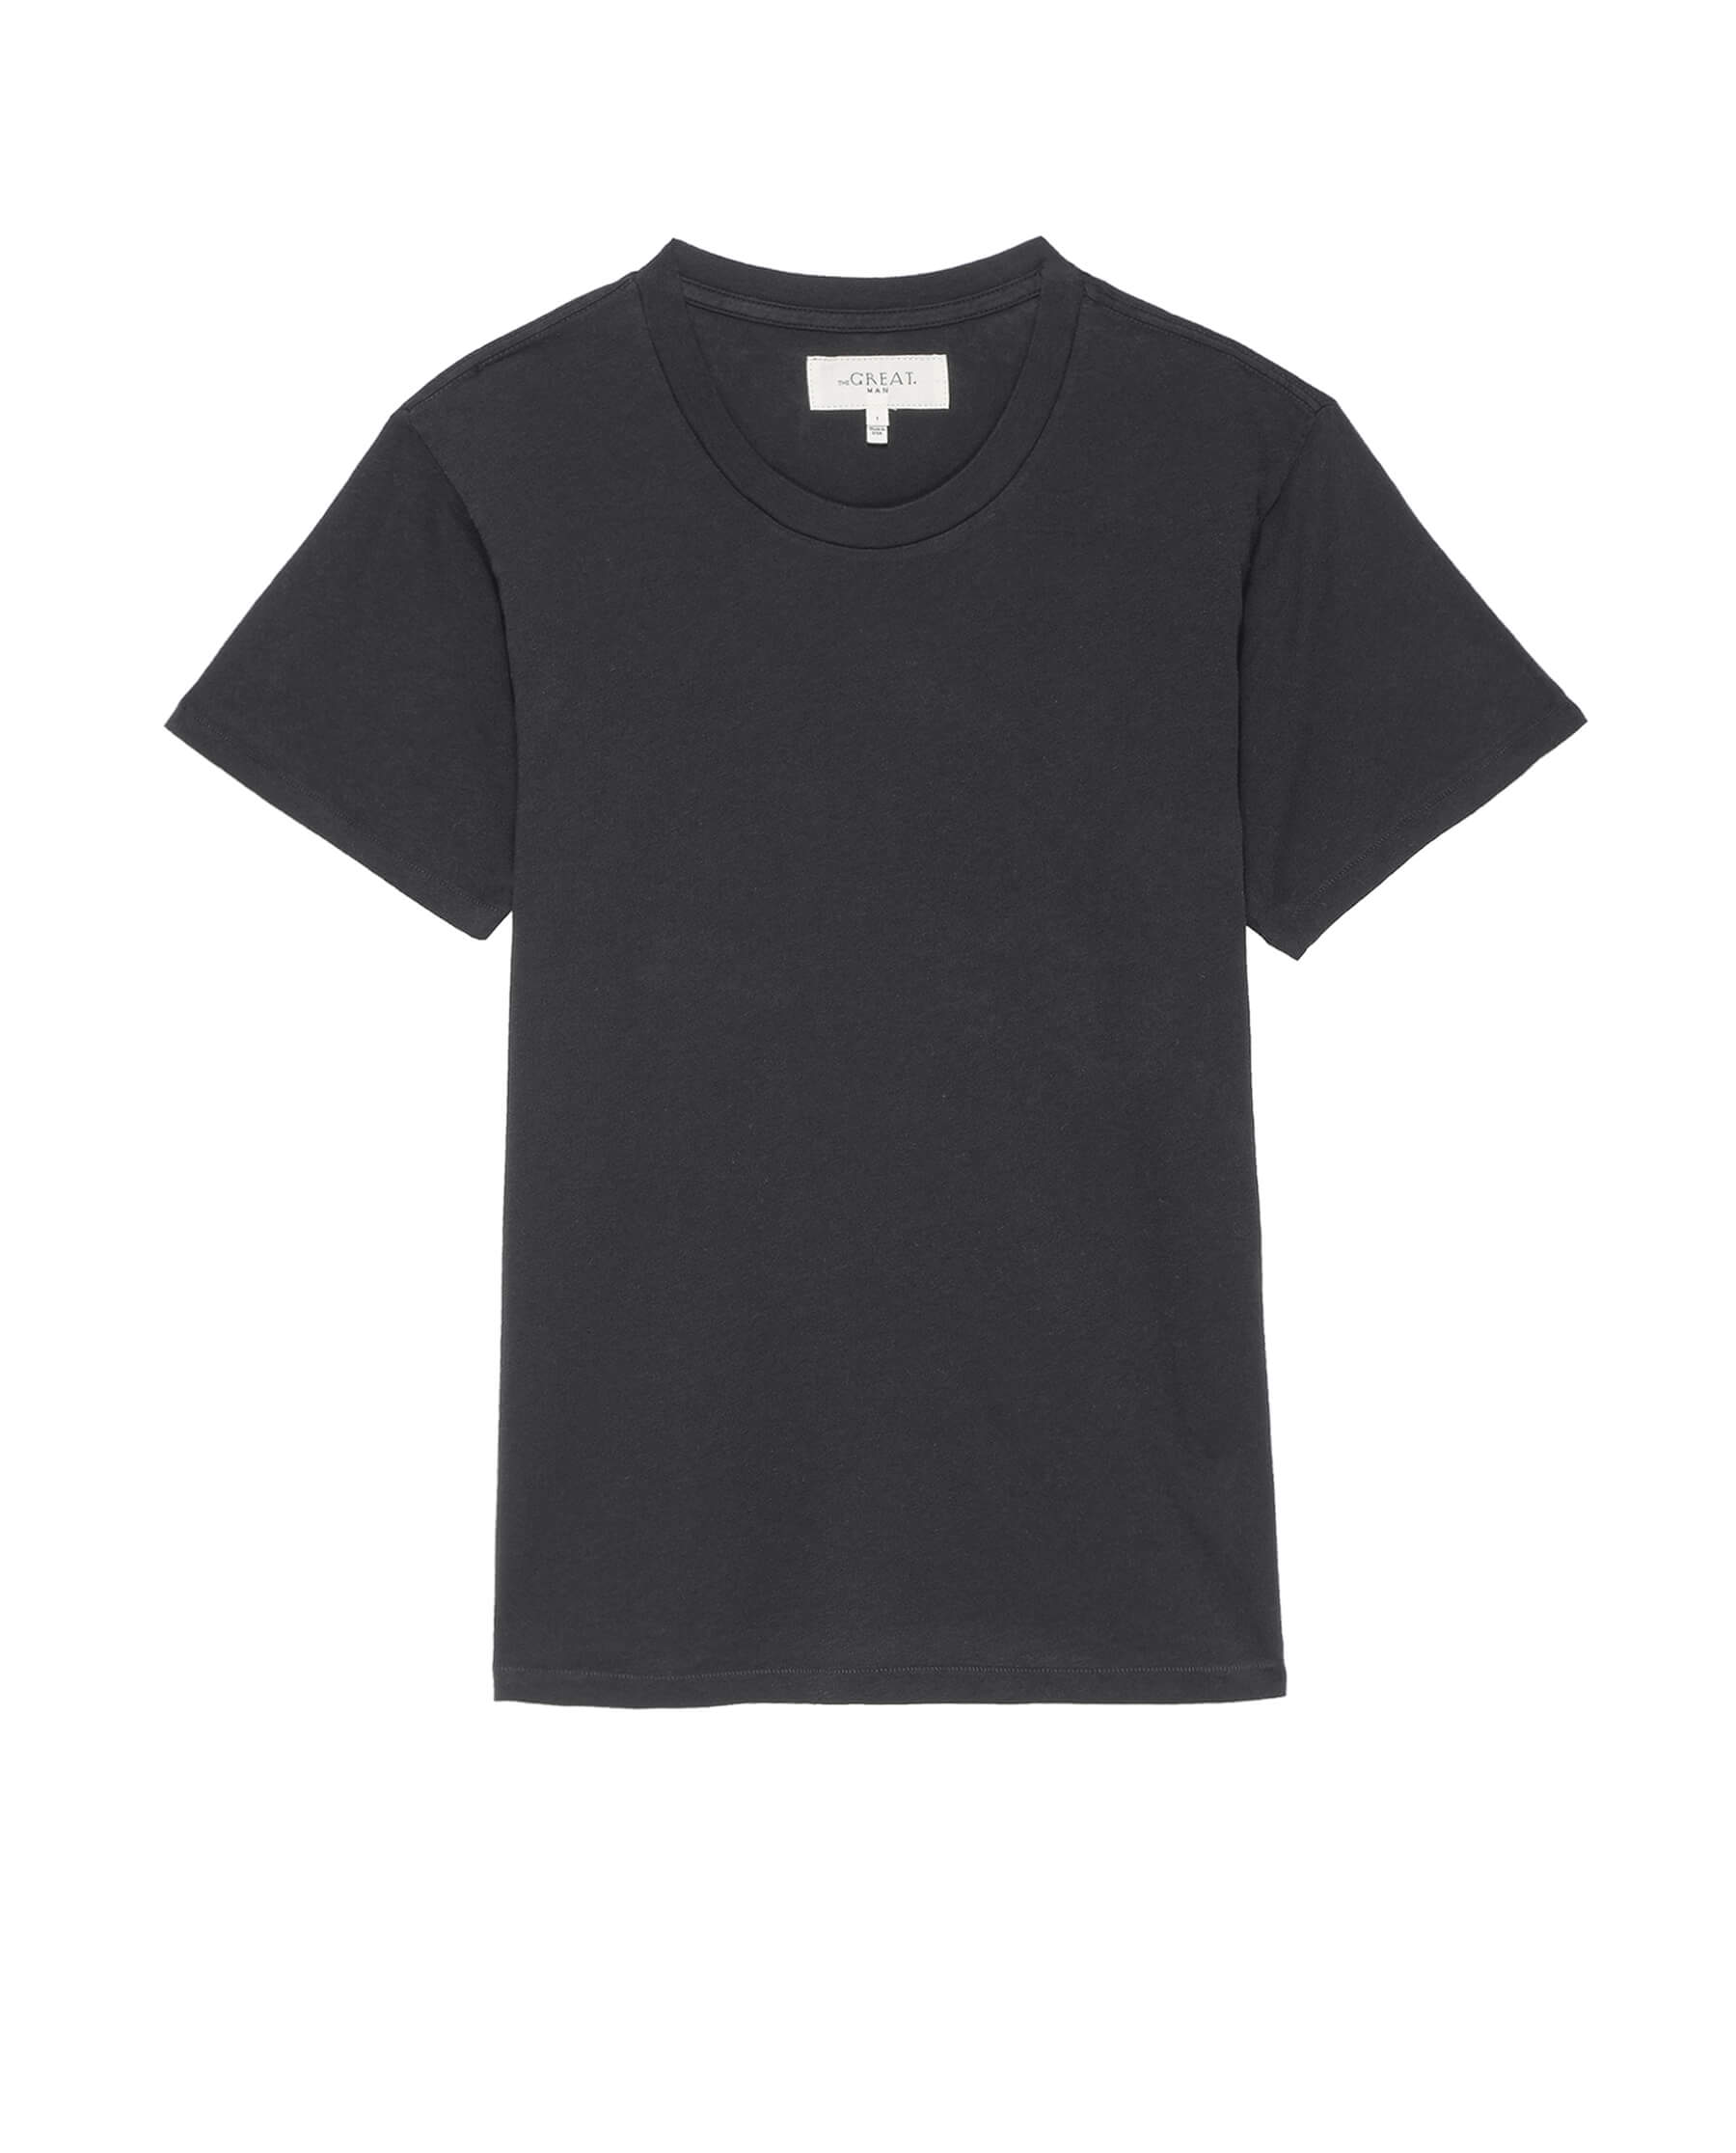 The Men's Slim Tee. -- WASHED BLACK – The Great.